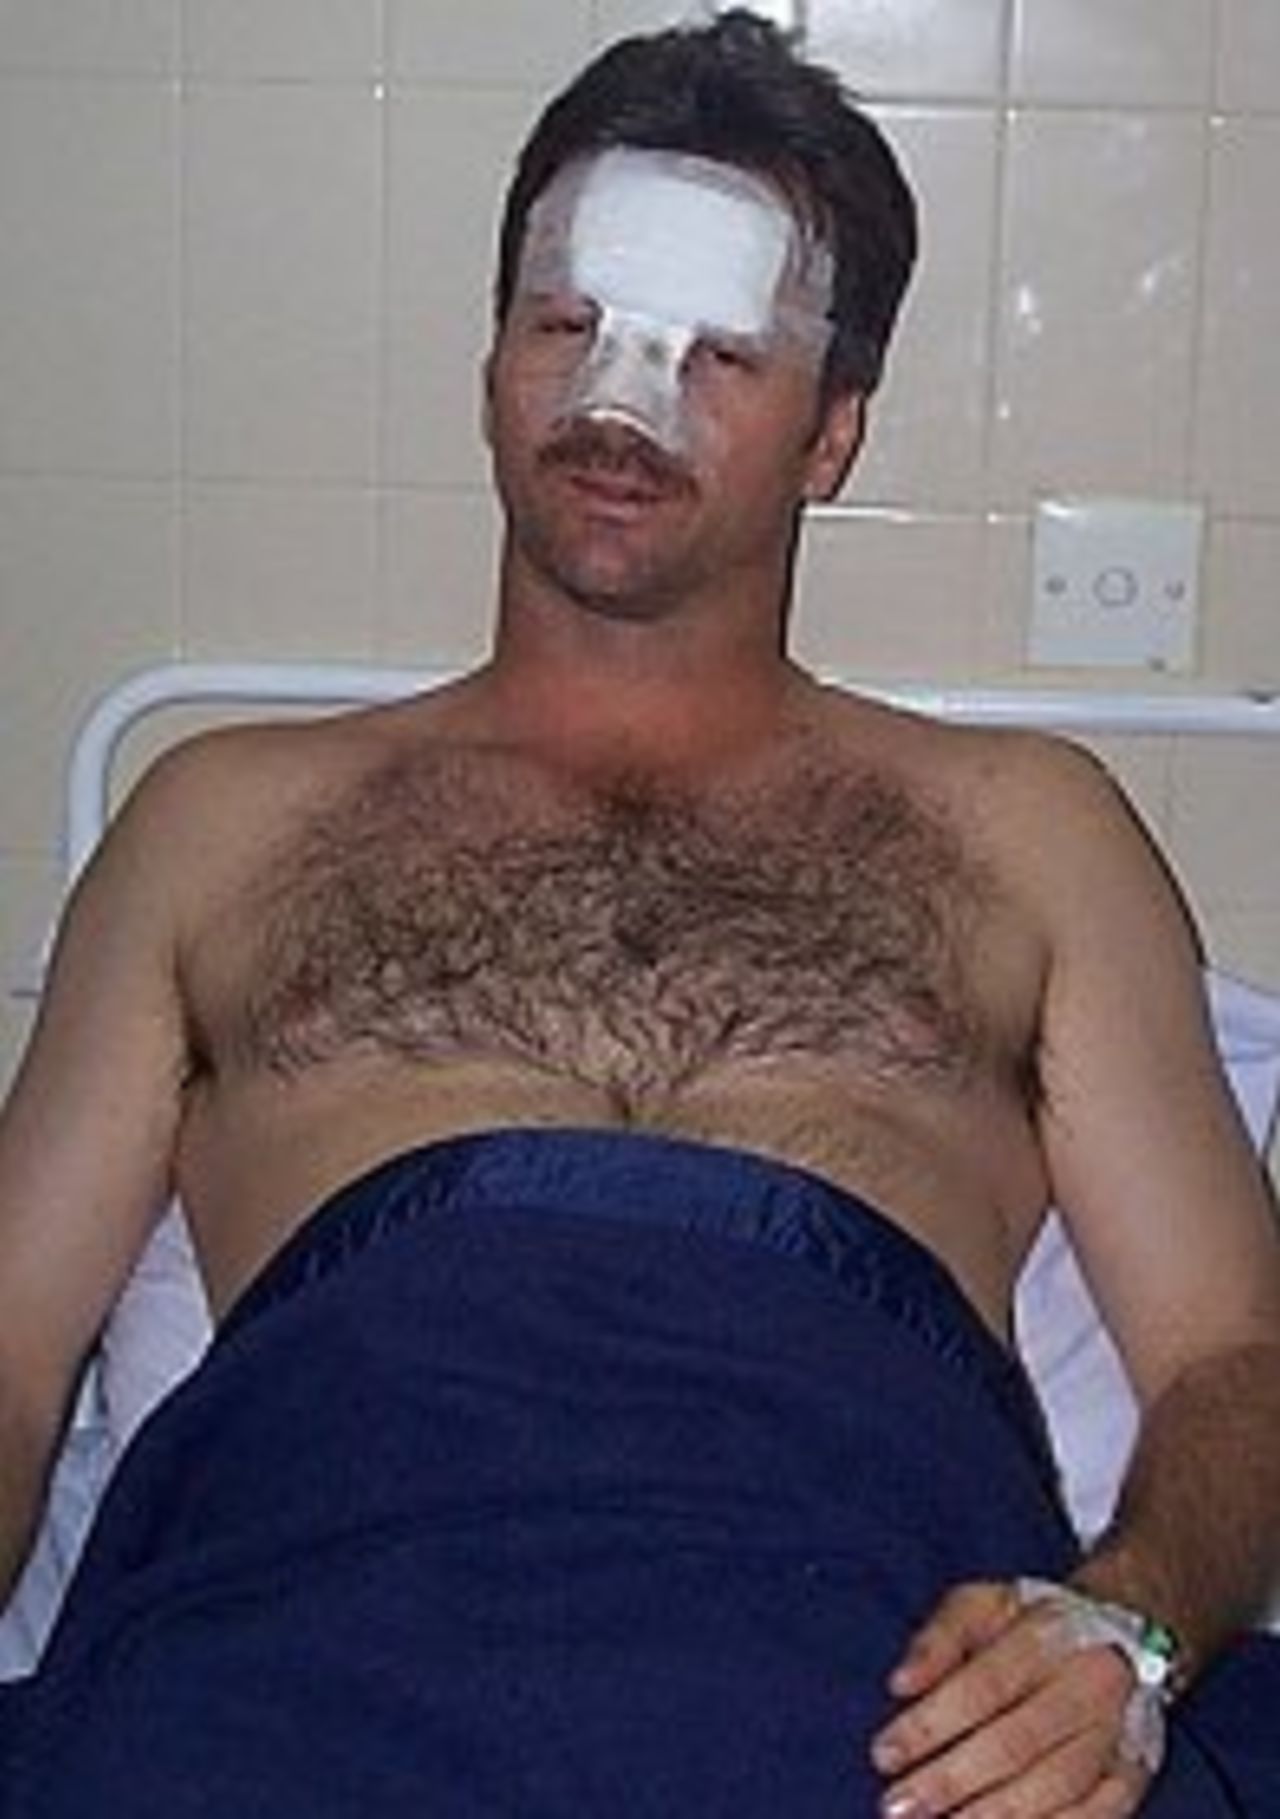 Steve Waugh lies in Colombo Hospital with a broken nose after he collided with Jason Gillespie during the first Test against Sri Lanka. 11 September 1999.